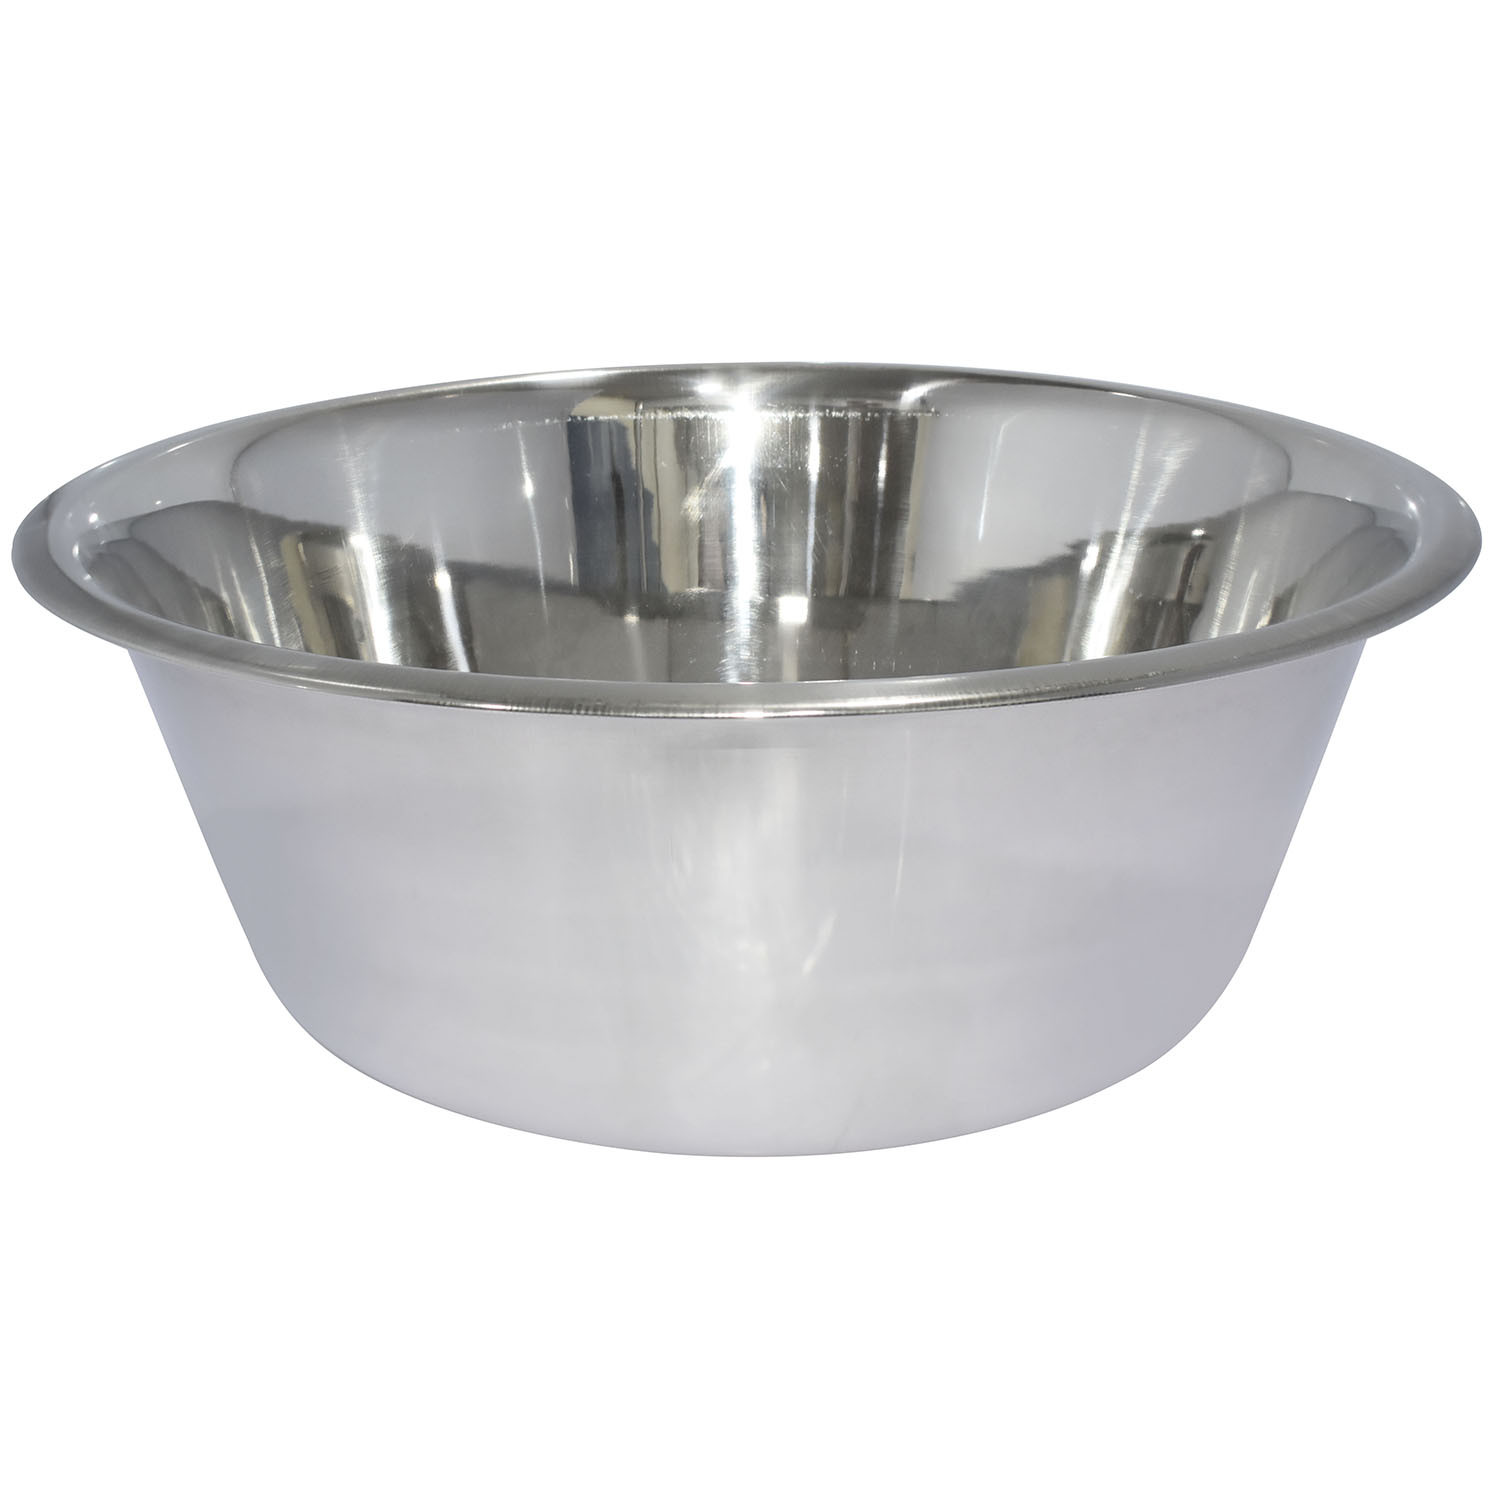 Clever Paws Large Stainless Steel Pet Bowl Image